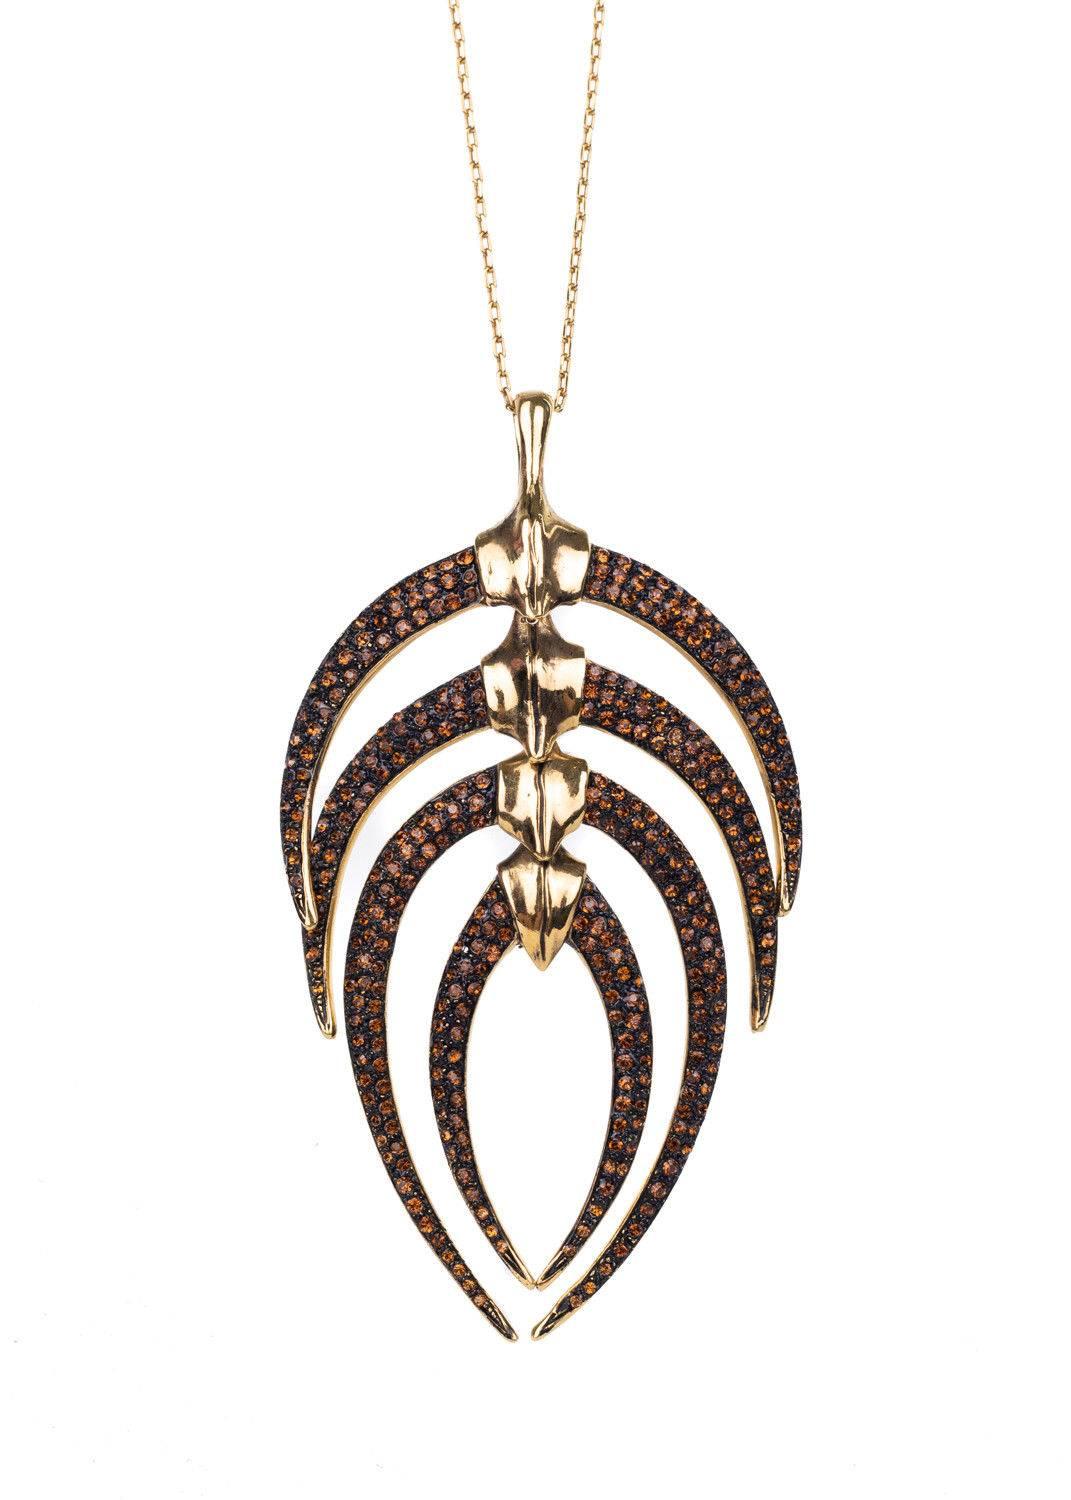 Roberto Cavalli gold plated pendant necklace featuring bronze swarovski crstals made into the shape of a leaf. This pendant necklace is a great contribution to an all black outfit. Pair it with a black dress for this necklace to stand out within the